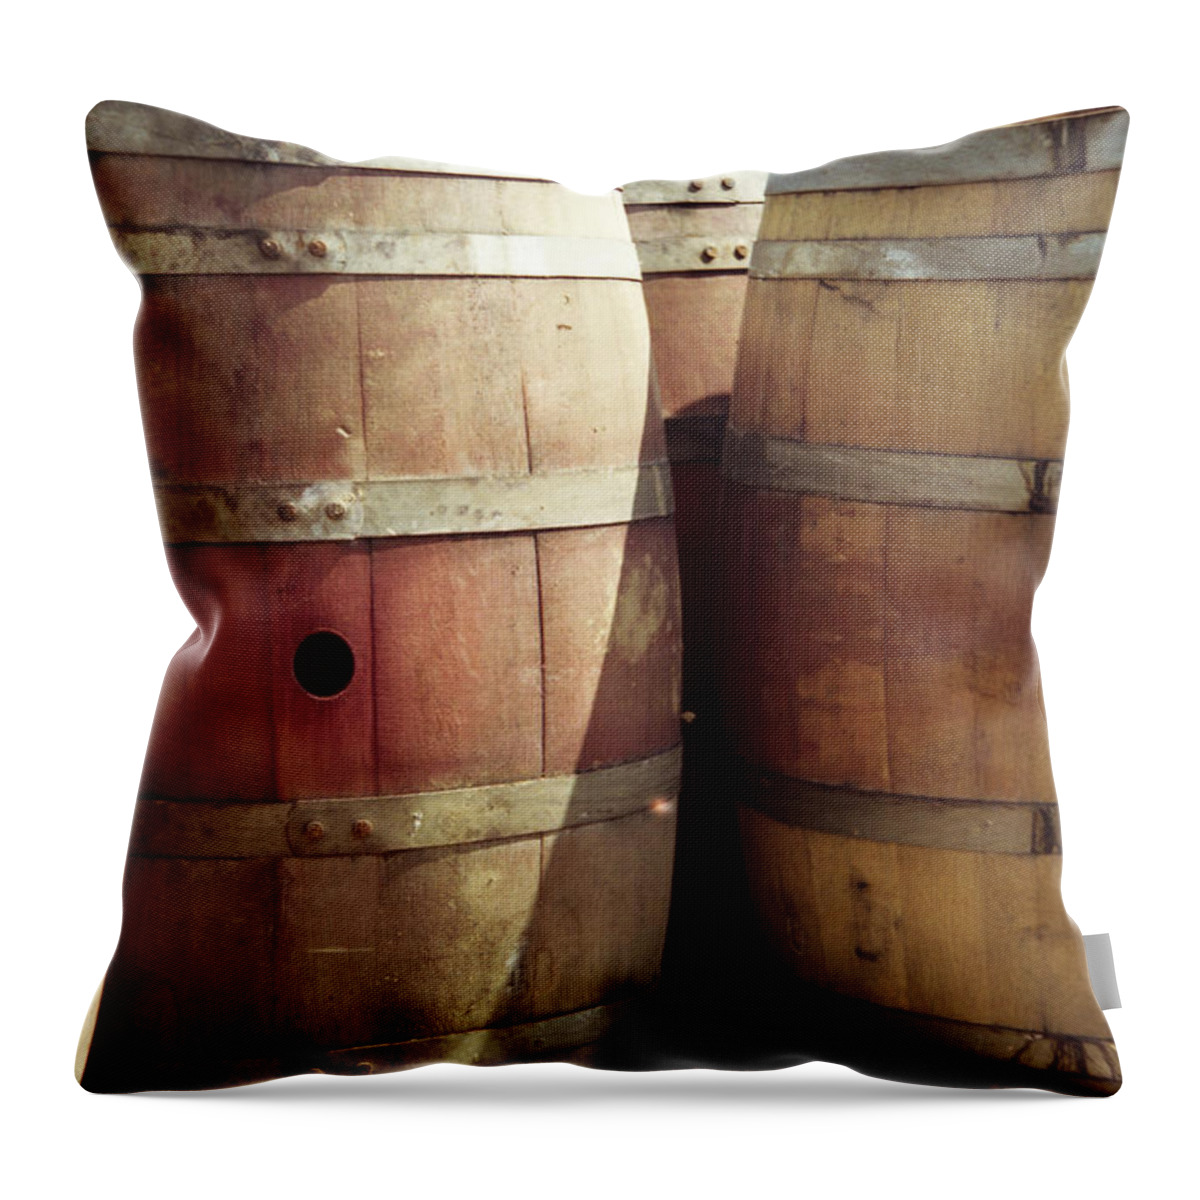 Fermenting Throw Pillow featuring the photograph Barrels For Wine by Donald gruener